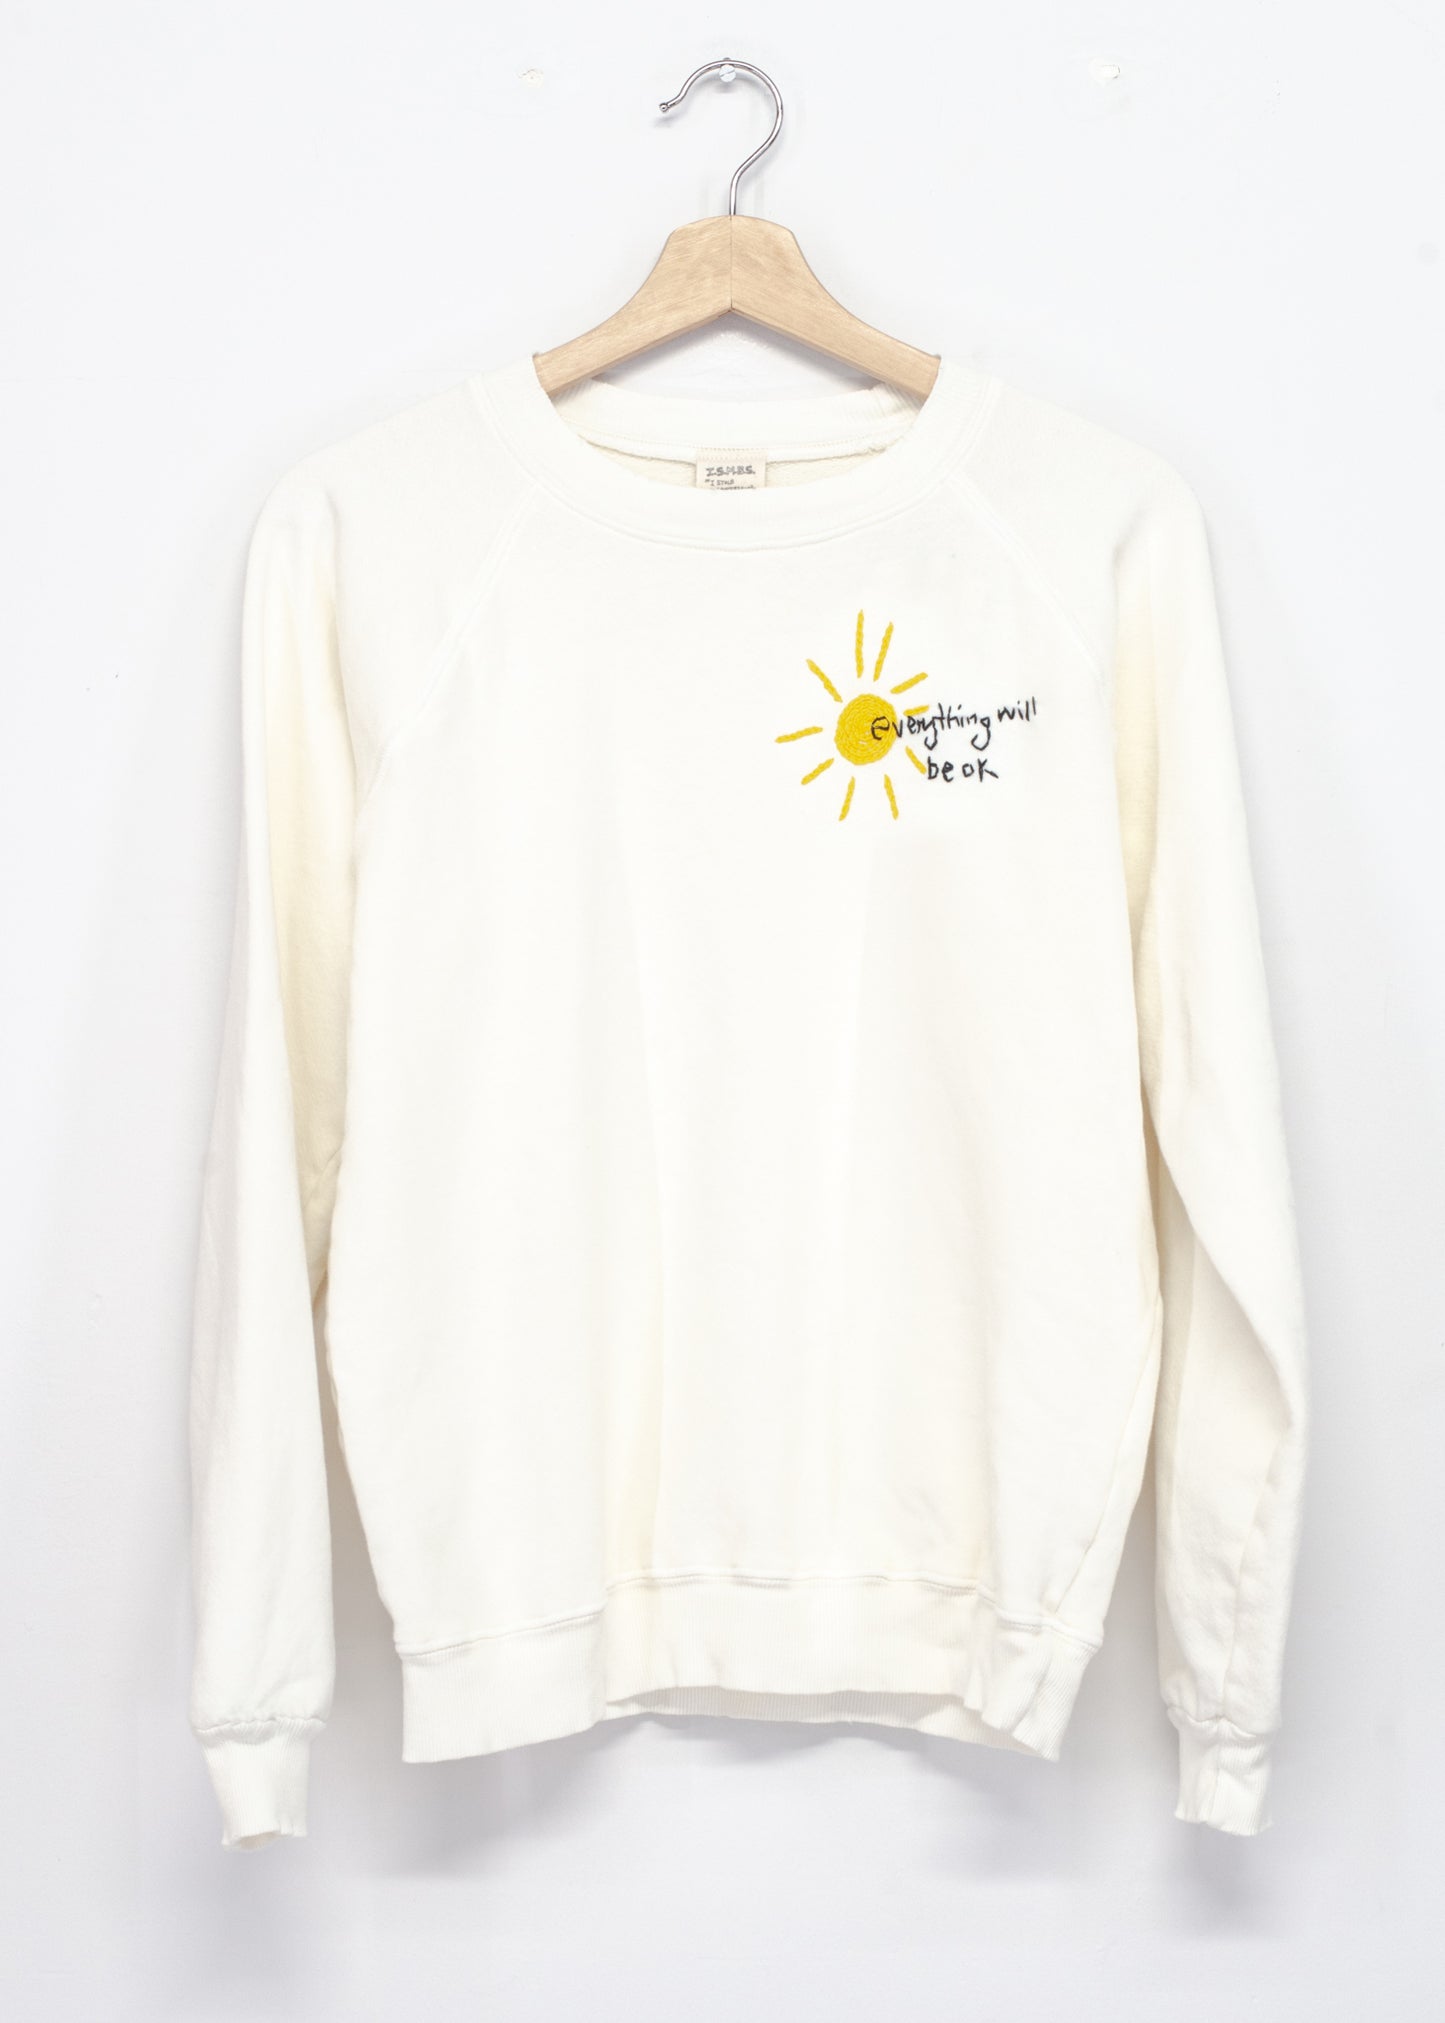 Everything will be ok Sweatshirts (10Colors)